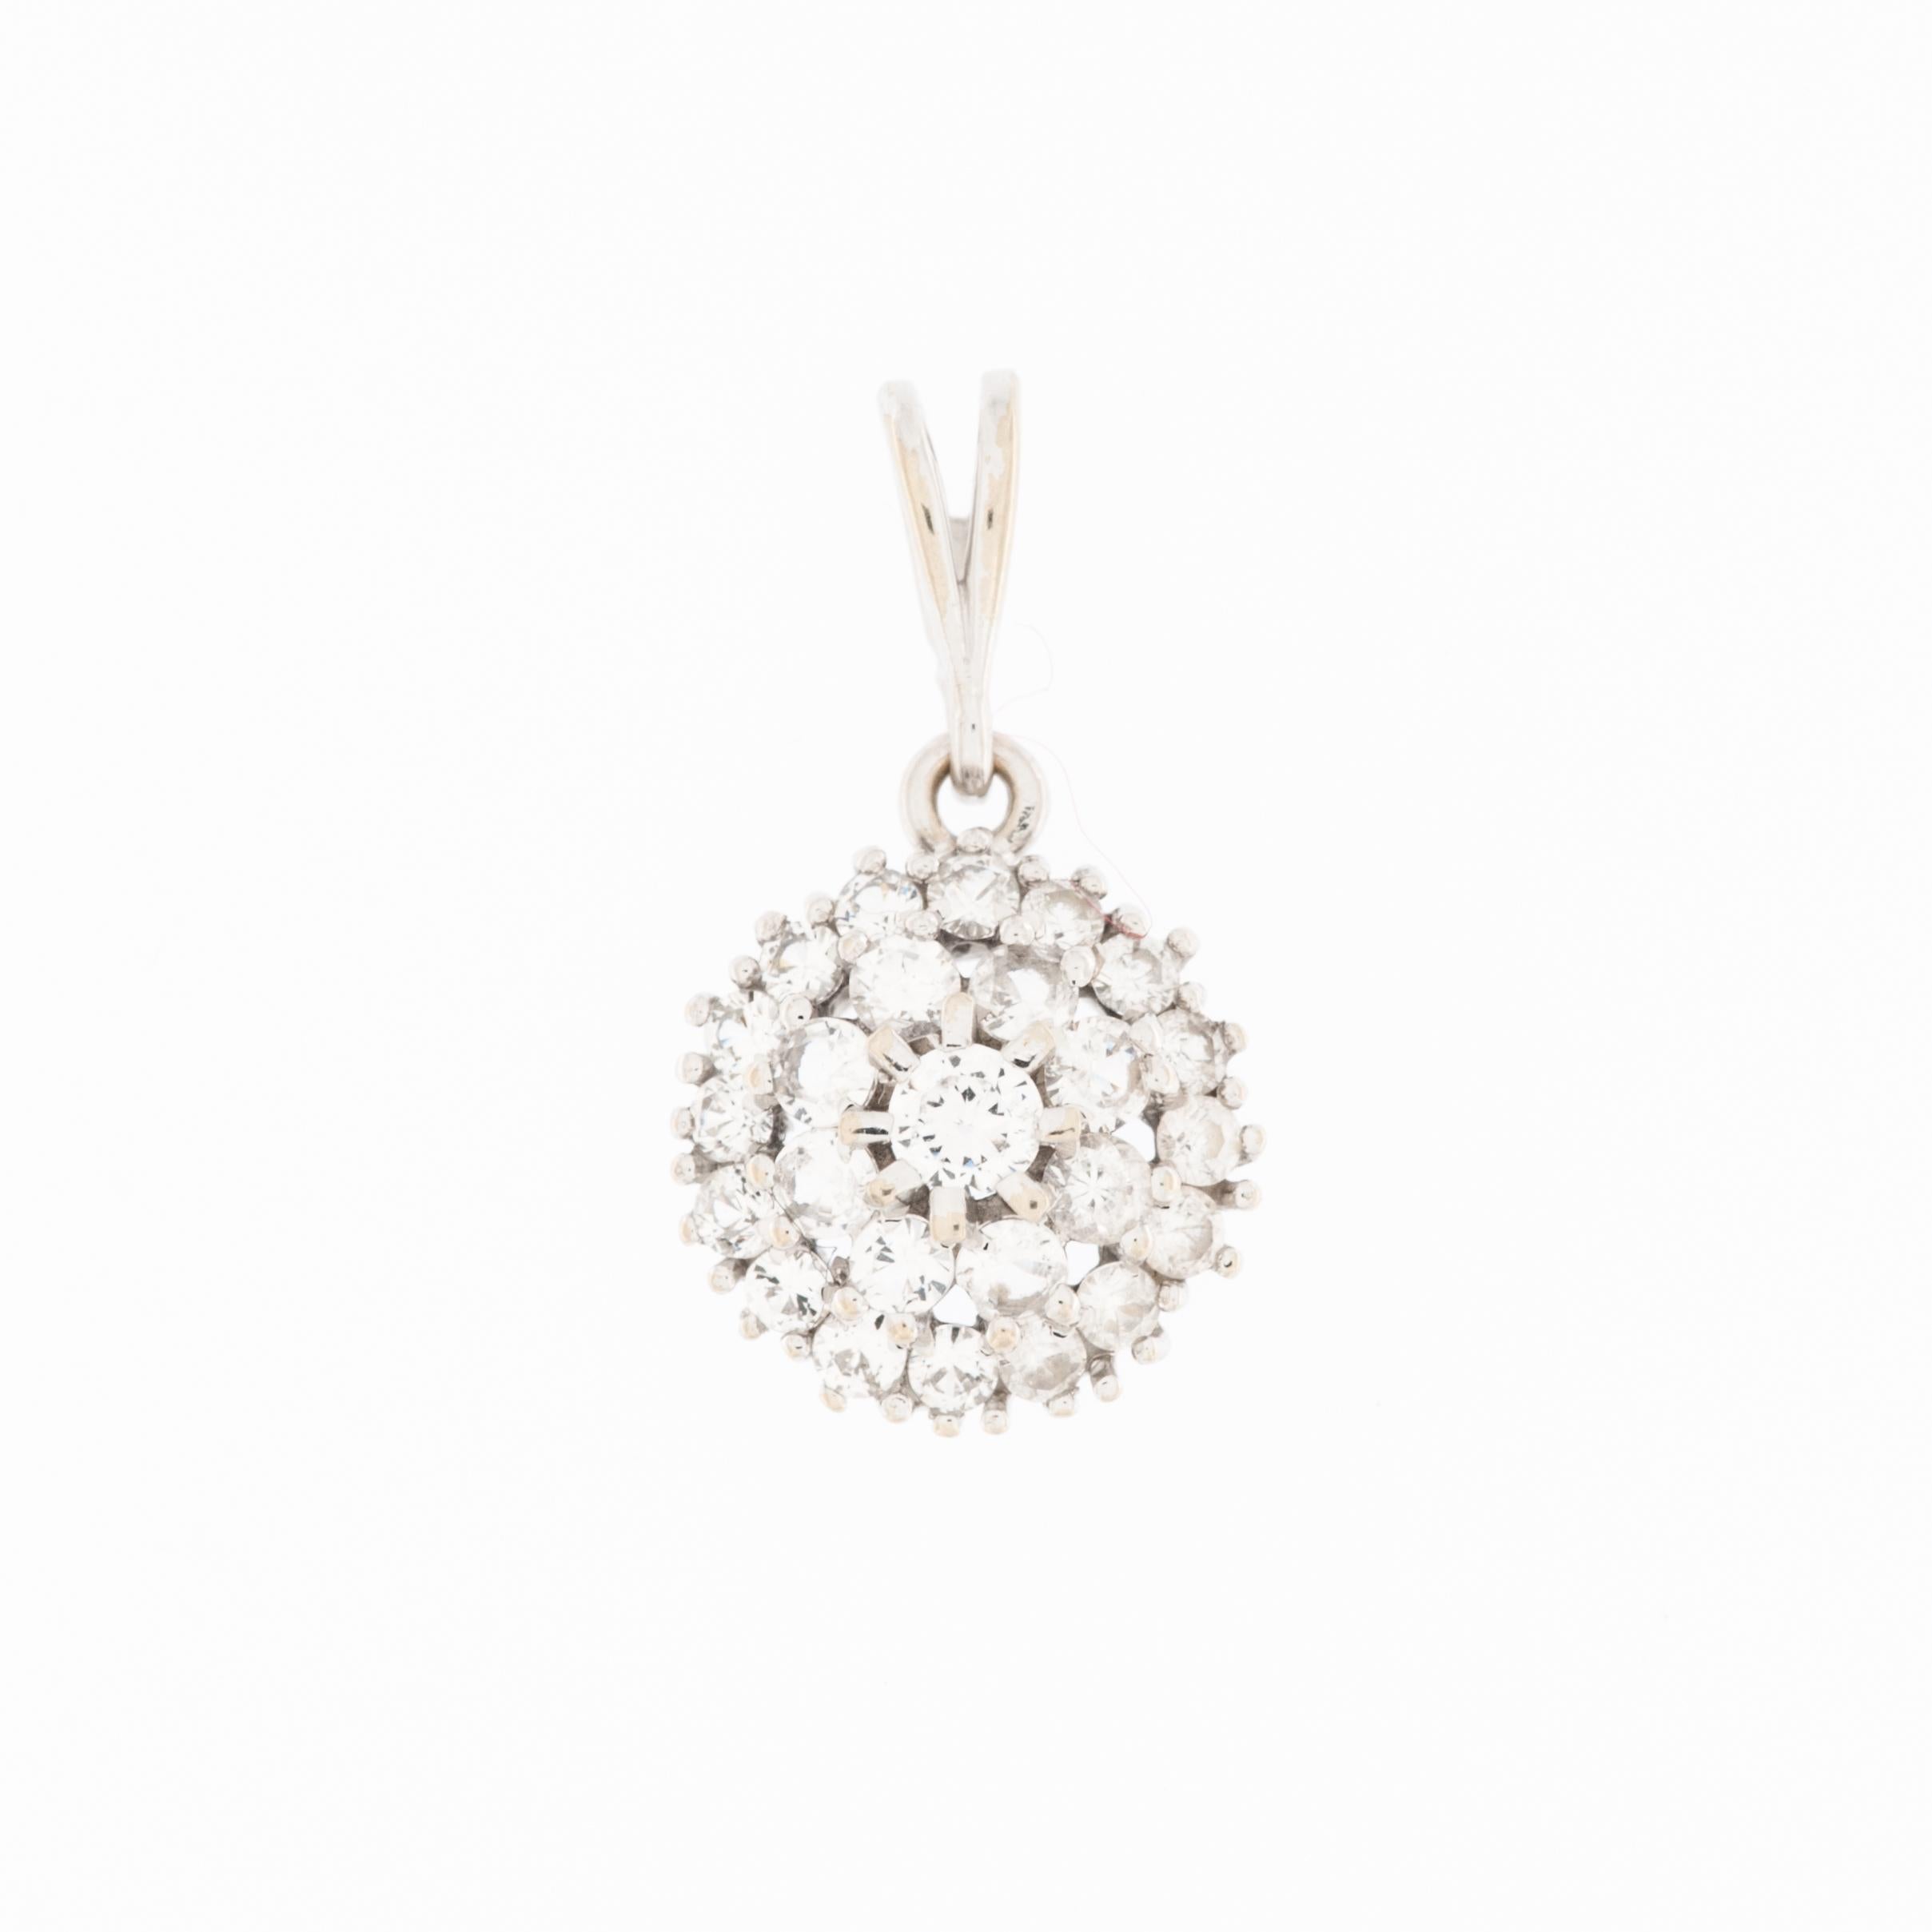 The French 18 karat White Gold Pendant with Diamonds is a sophisticated and timeless piece of jewelry that exudes elegance and refinement.

Crafted from 18 karat white gold, the pendant boasts a lustrous and modern appearance. The choice of white